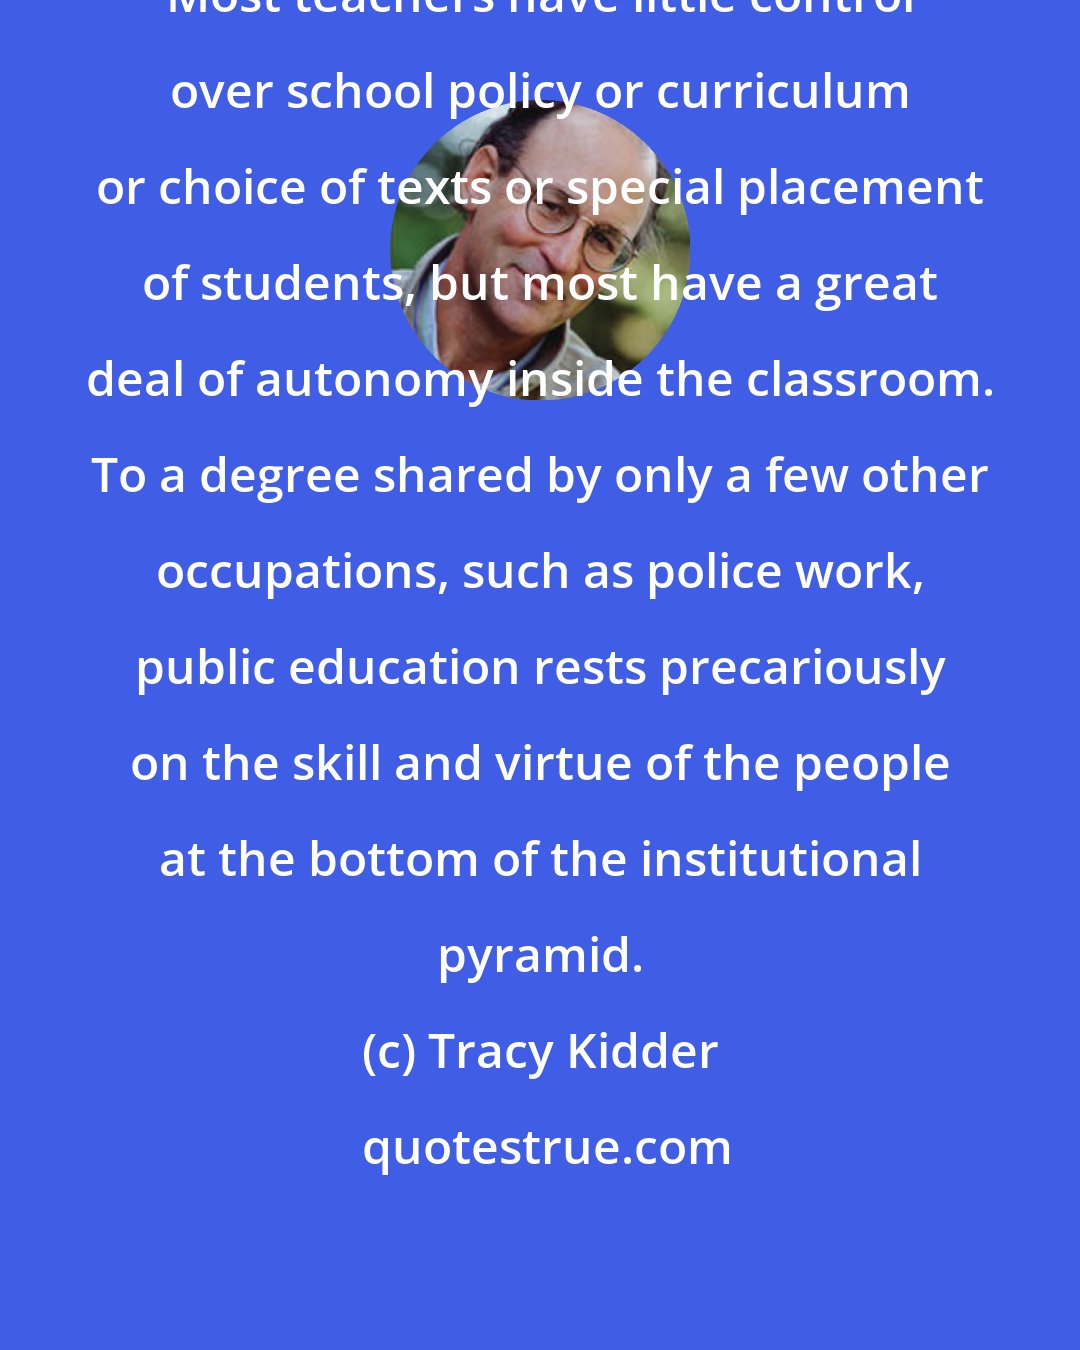 Tracy Kidder: Most teachers have little control over school policy or curriculum or choice of texts or special placement of students, but most have a great deal of autonomy inside the classroom. To a degree shared by only a few other occupations, such as police work, public education rests precariously on the skill and virtue of the people at the bottom of the institutional pyramid.